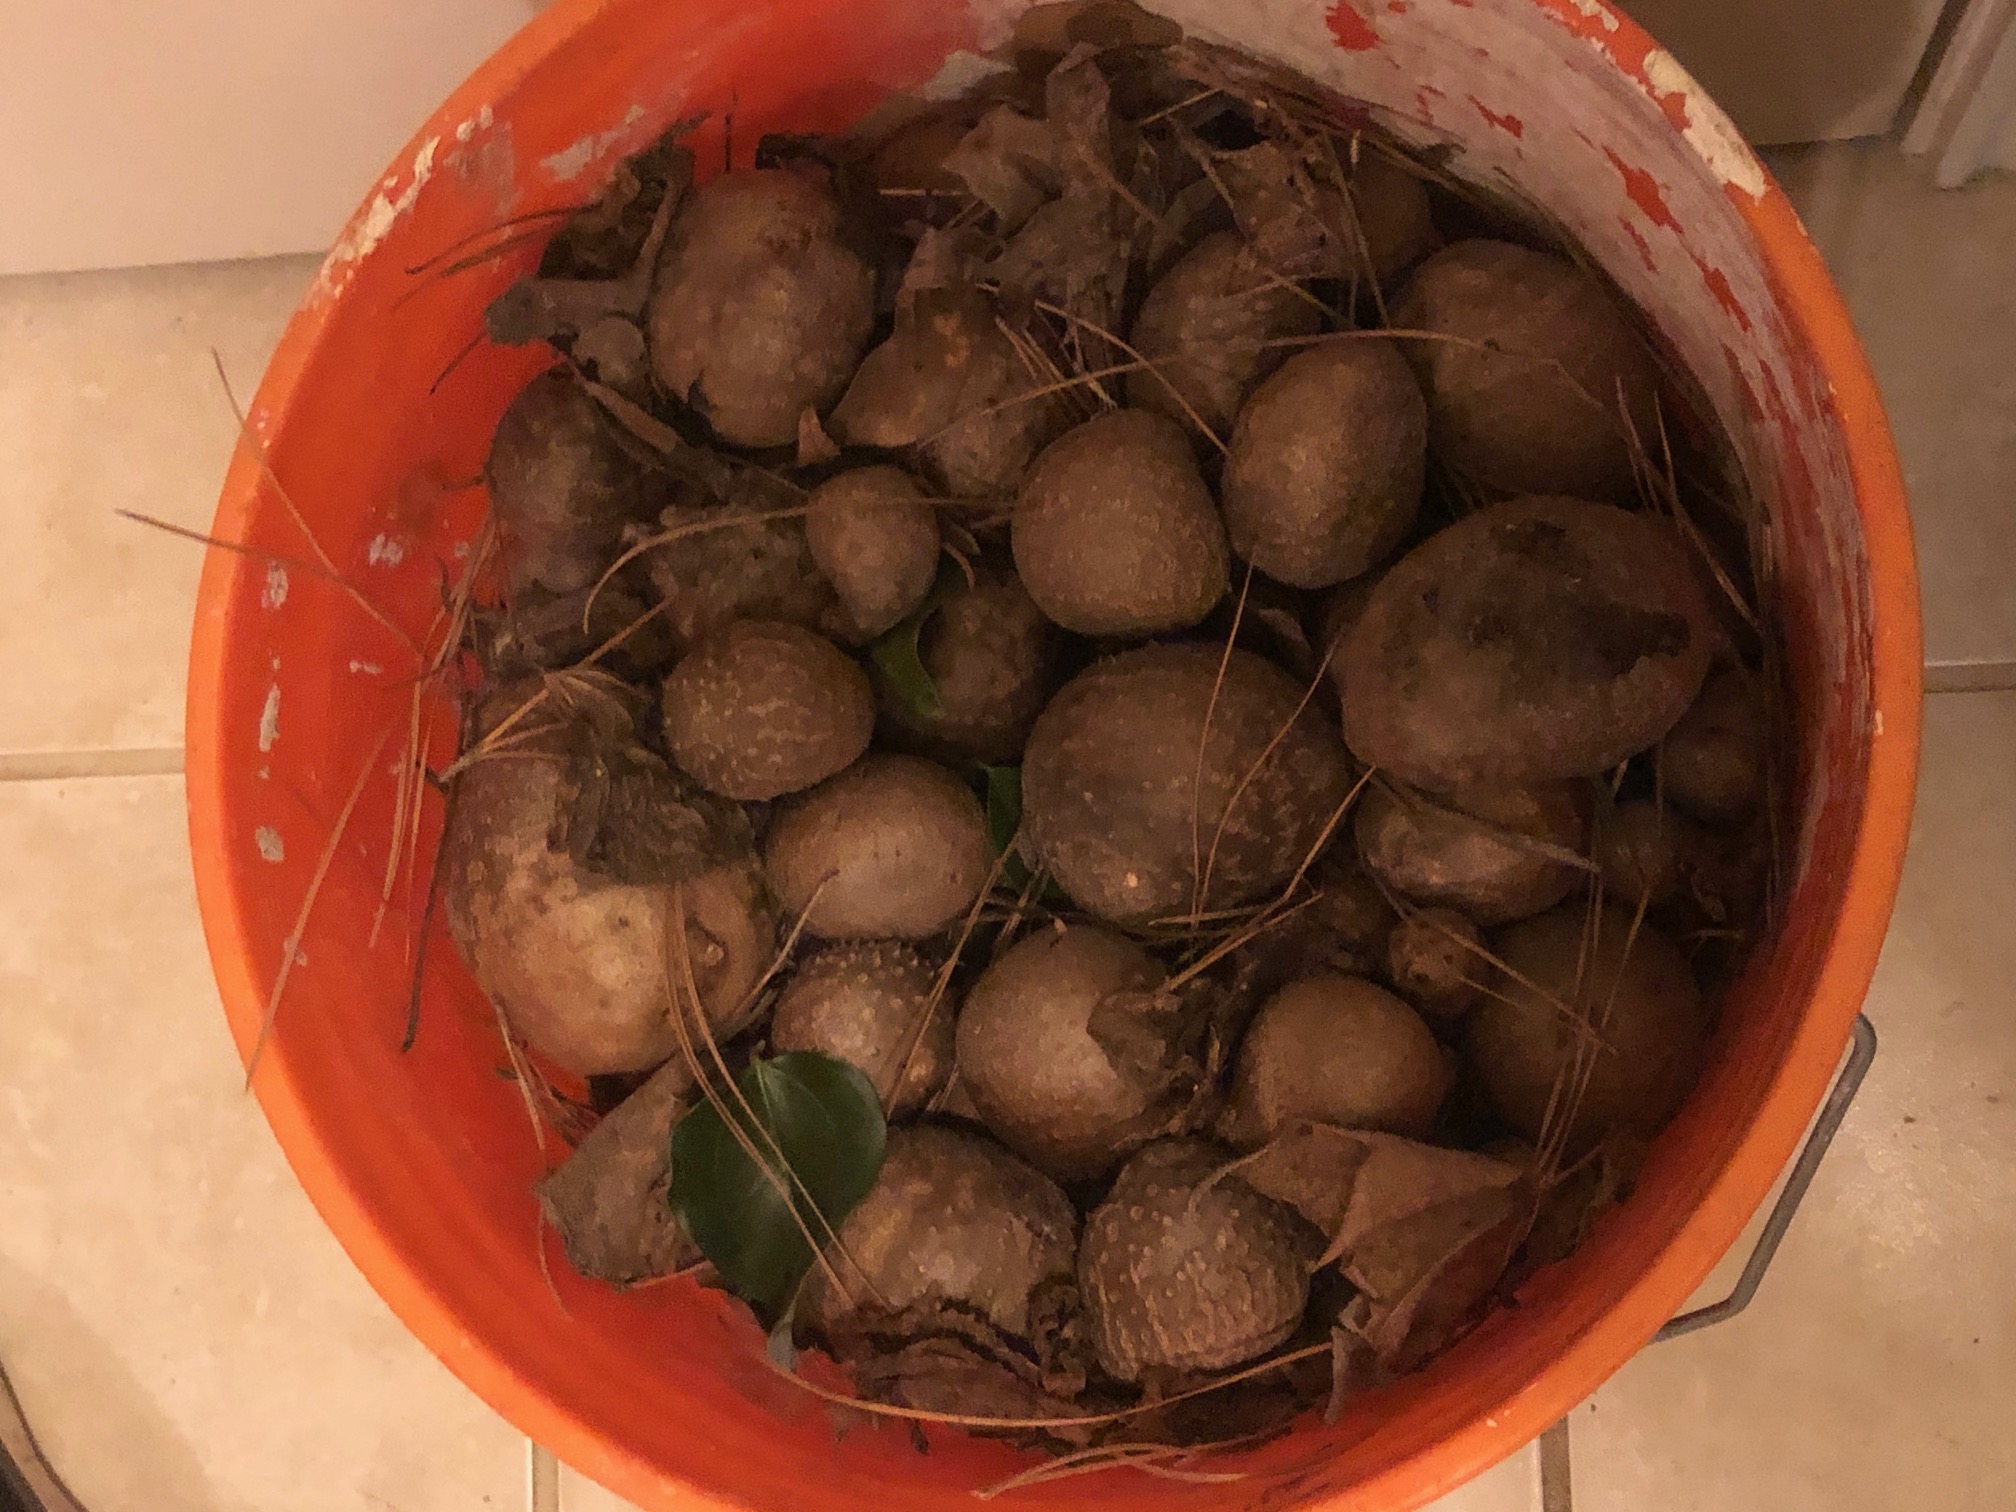 Bulbils in a bucket- removed by The Woodlands Task Force